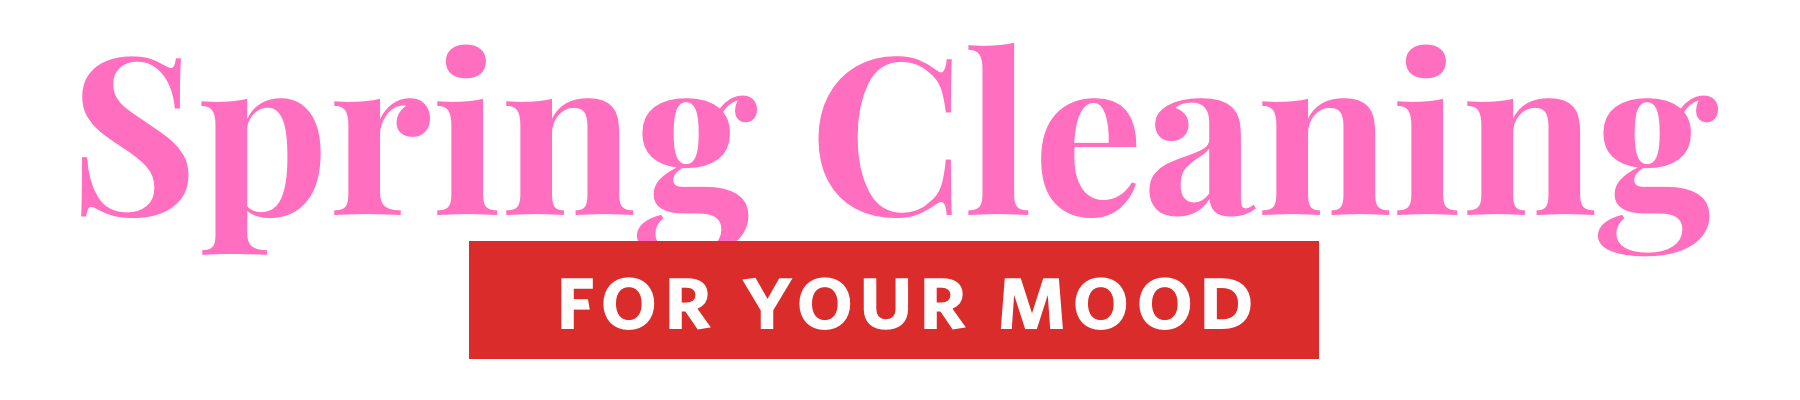 Spring Cleaning Transparent Background